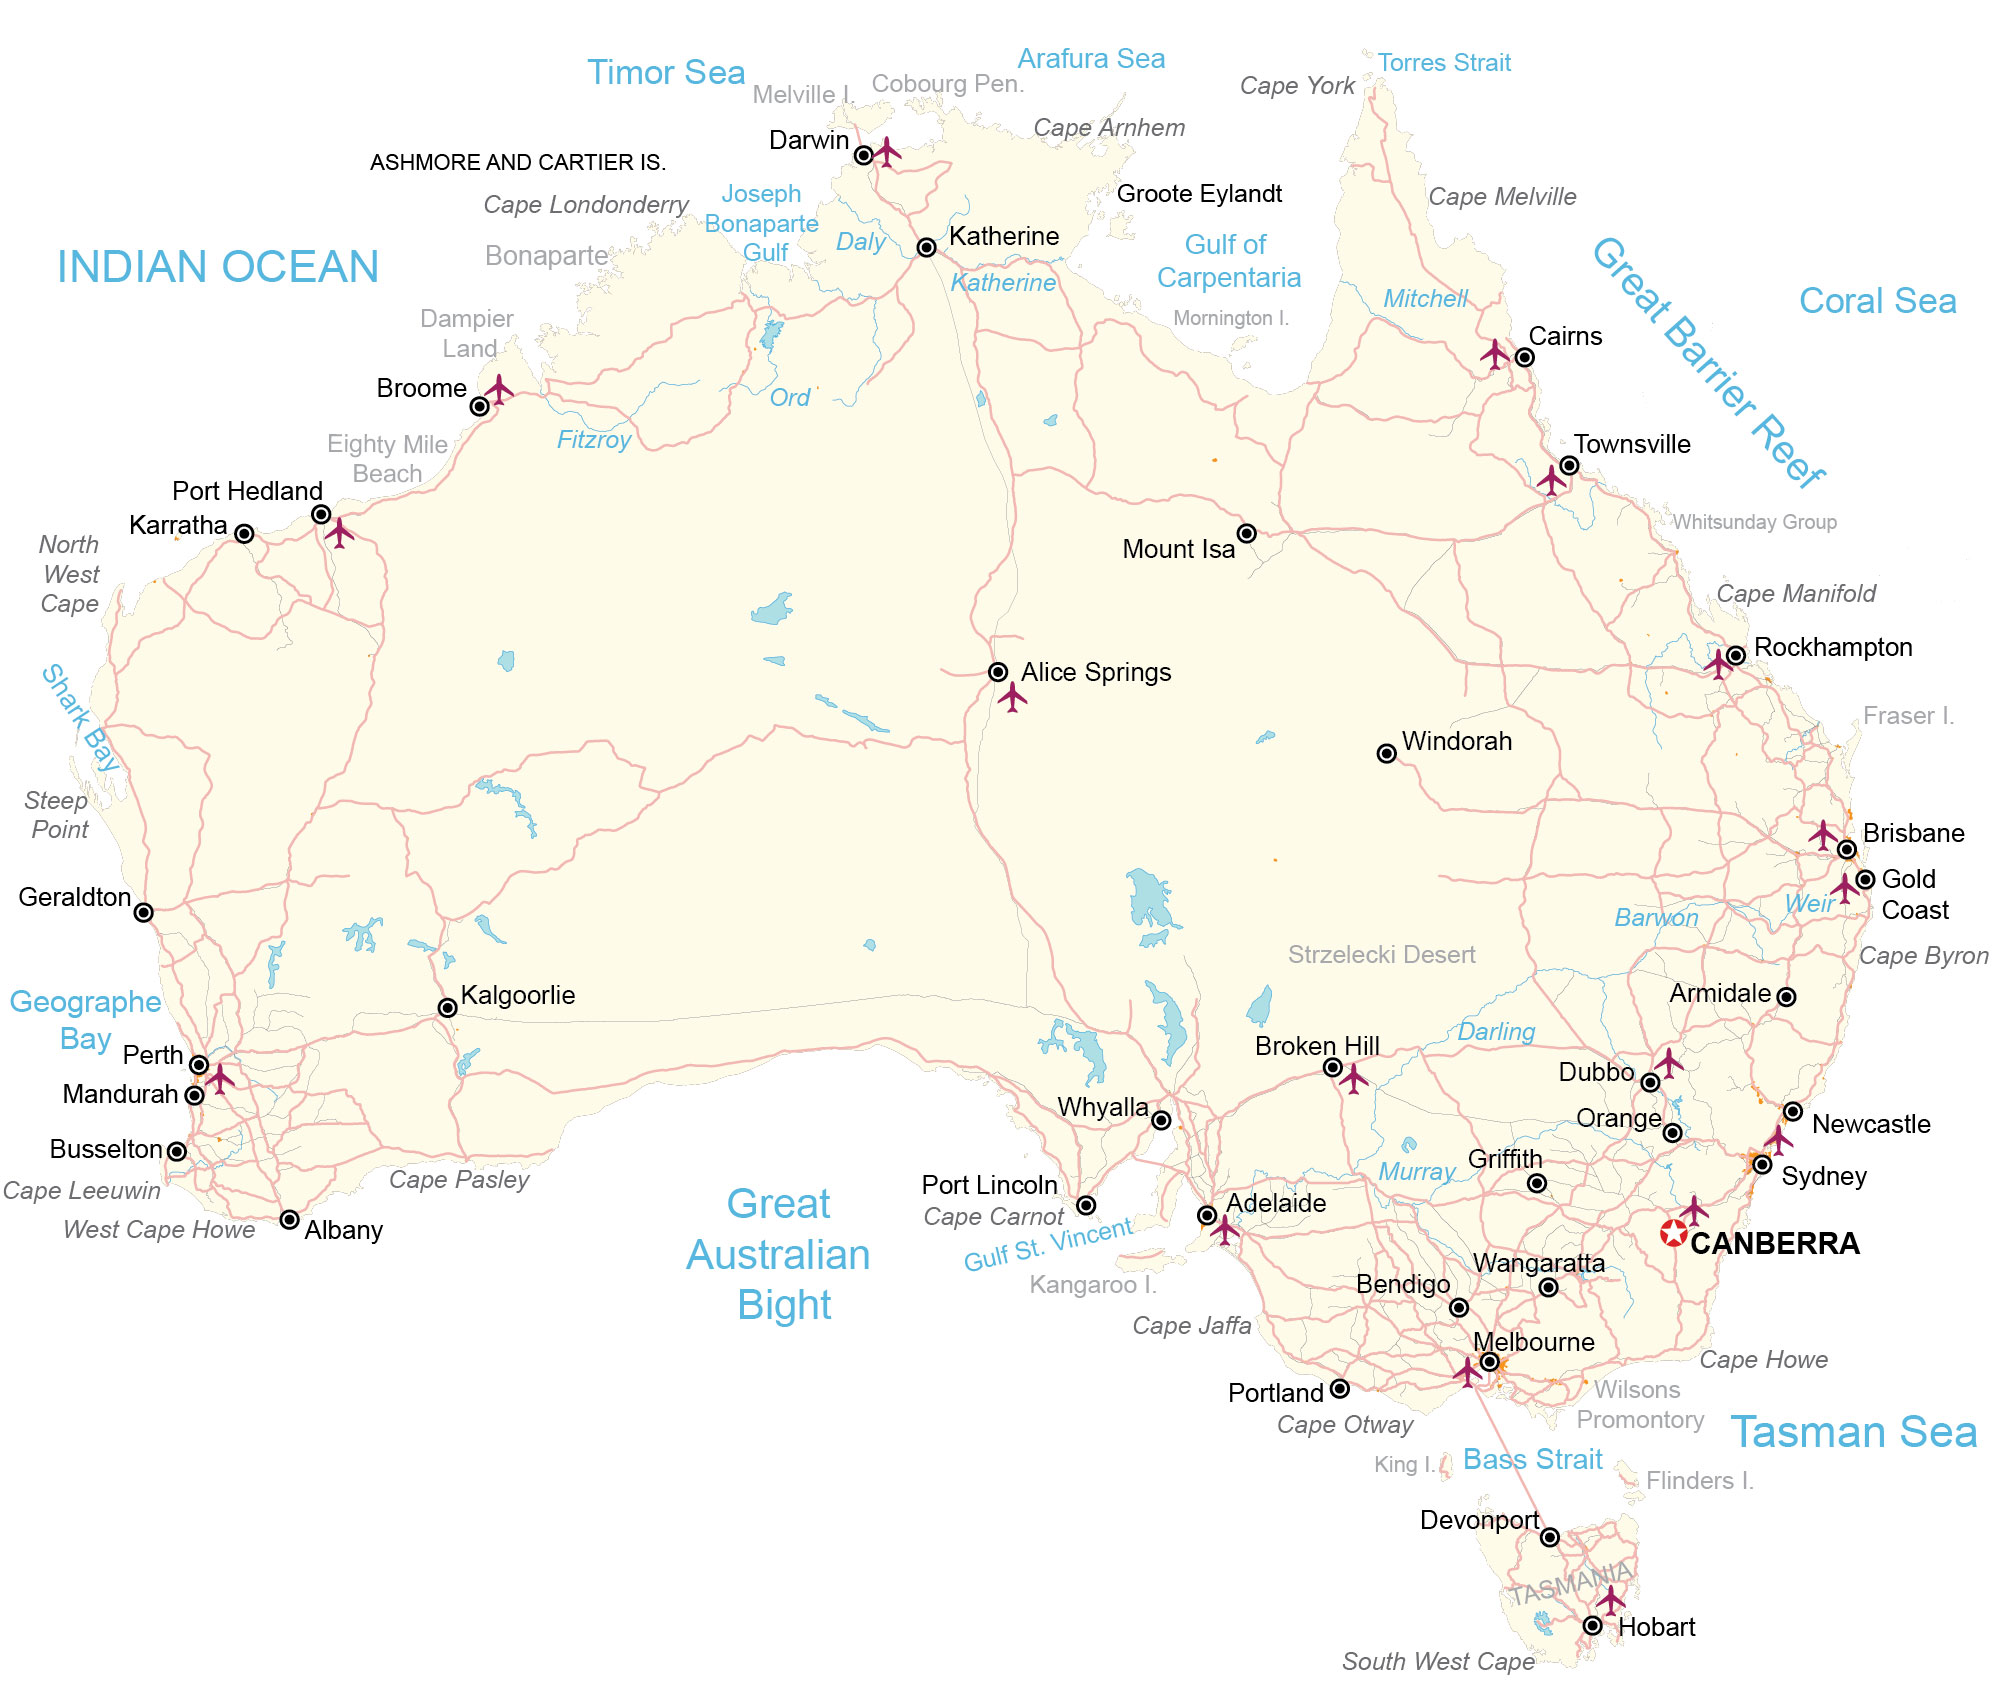 ^ Reference map of Australia, mainly showing roads and cities